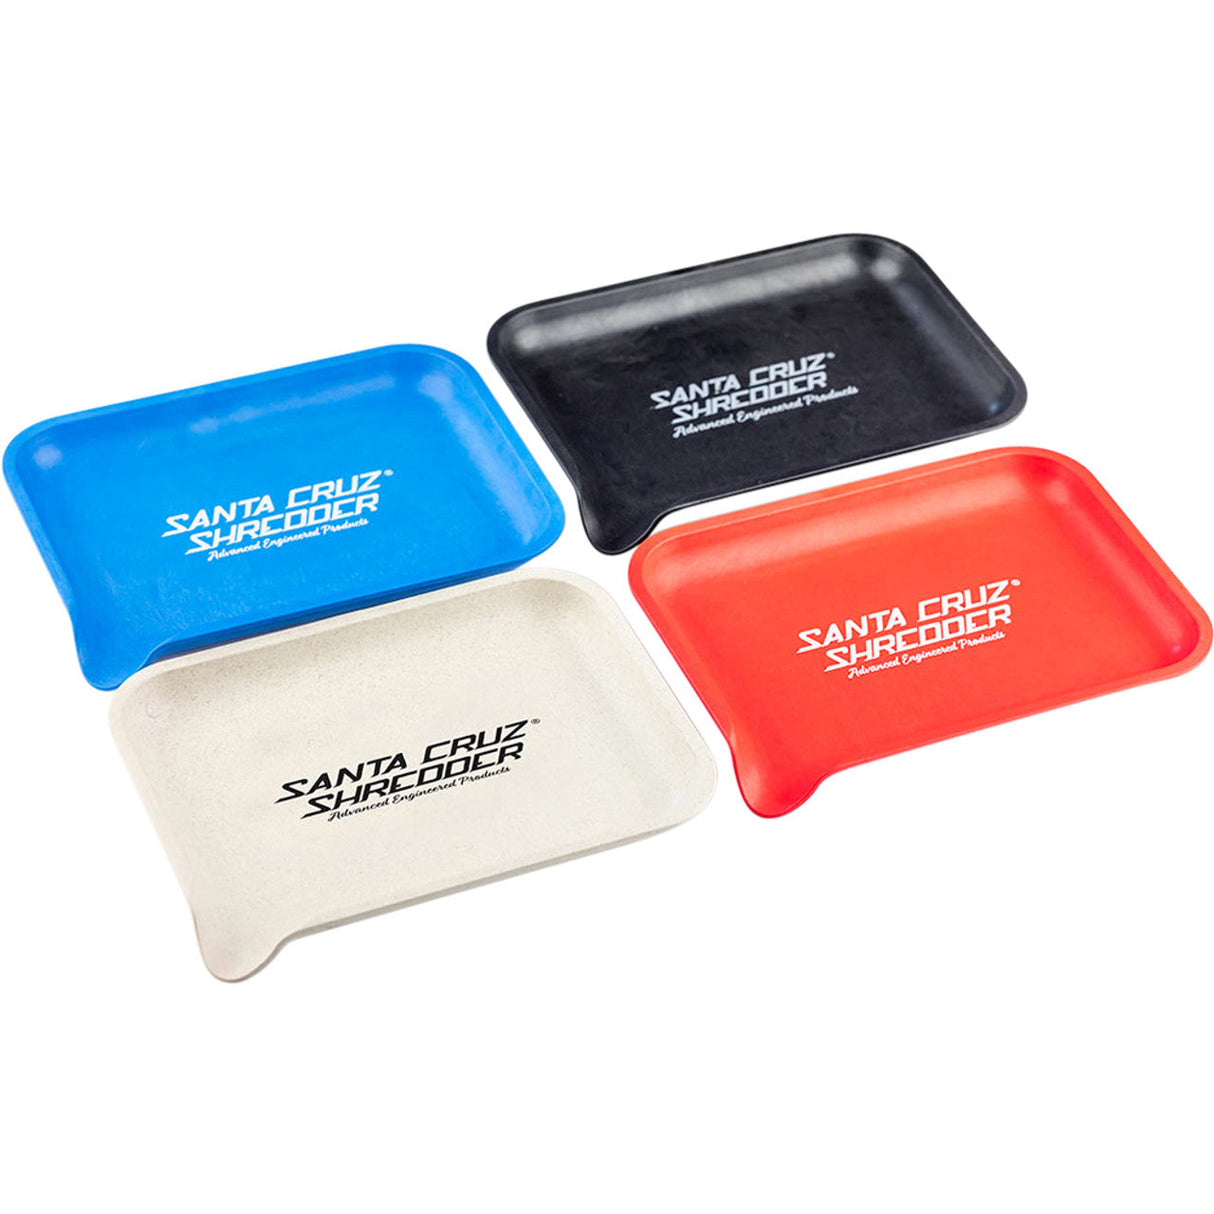 Assorted Santa Cruz Shredder Hemp Rolling Trays with SCS Logo in blue, black, red, and natural